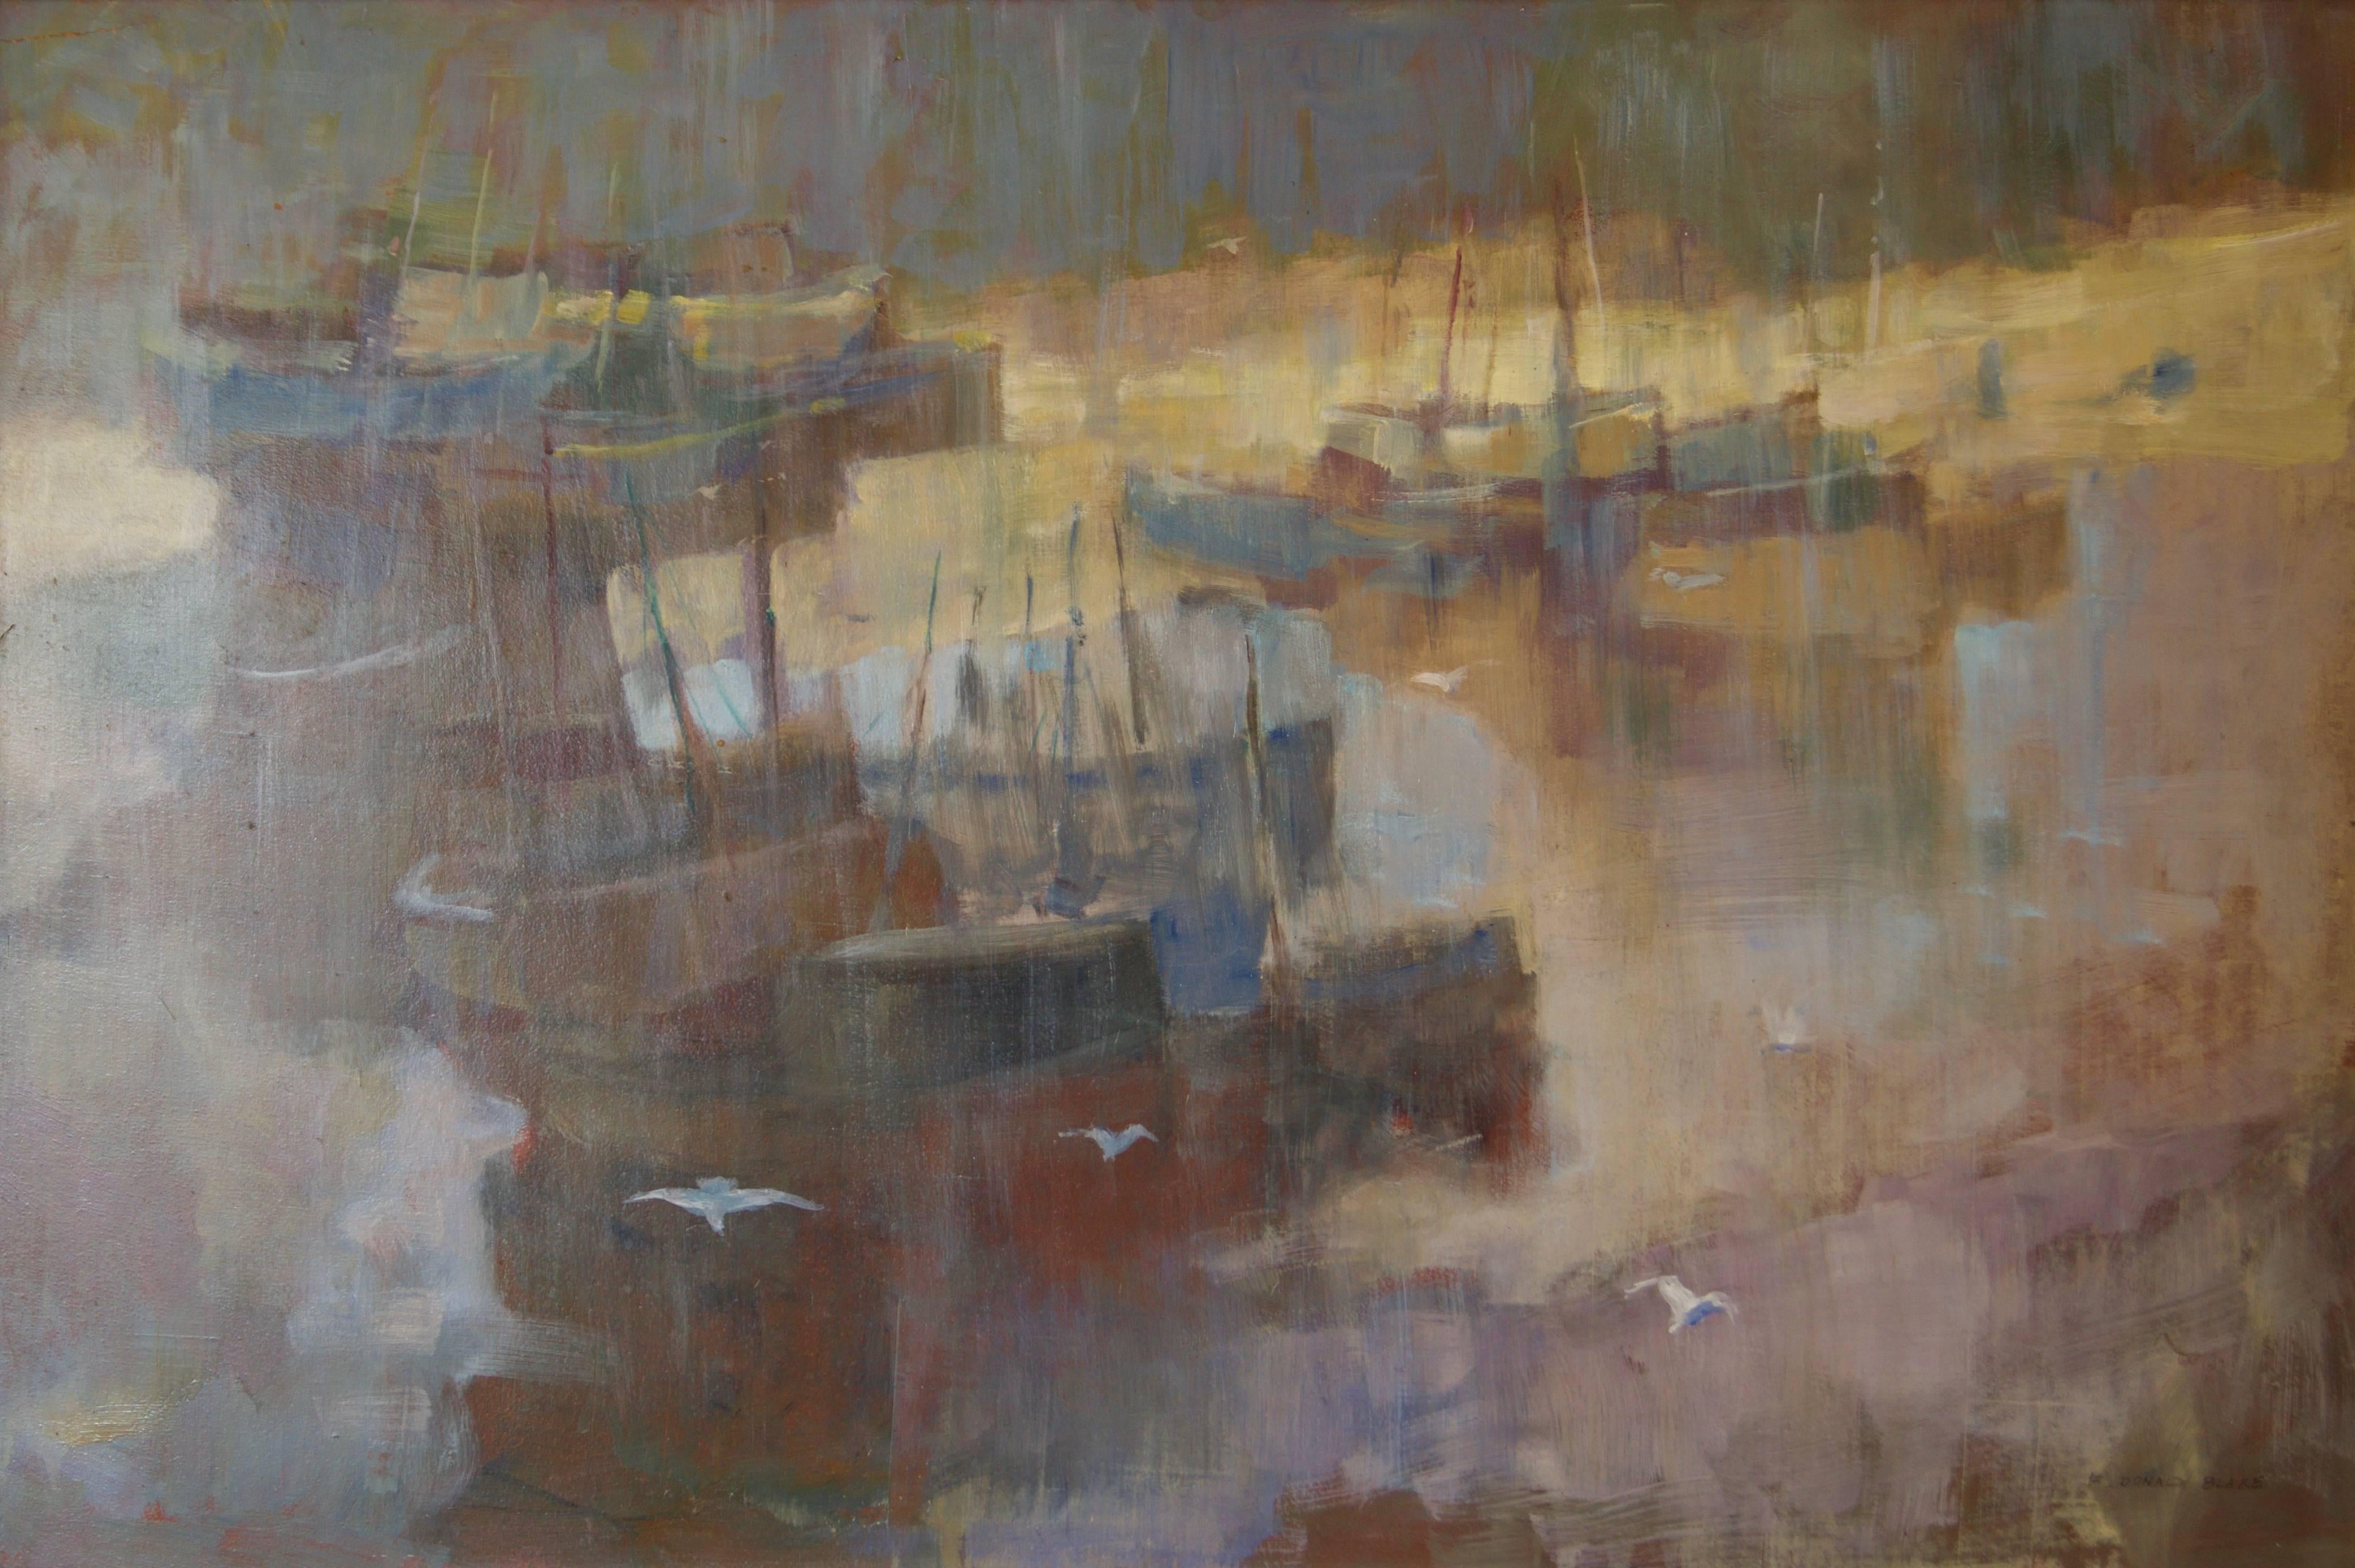 Frederick Donald Blake Figurative Painting - Morning Light Seascape - Mid 20th Century Oil of Boats England by Donald Blake